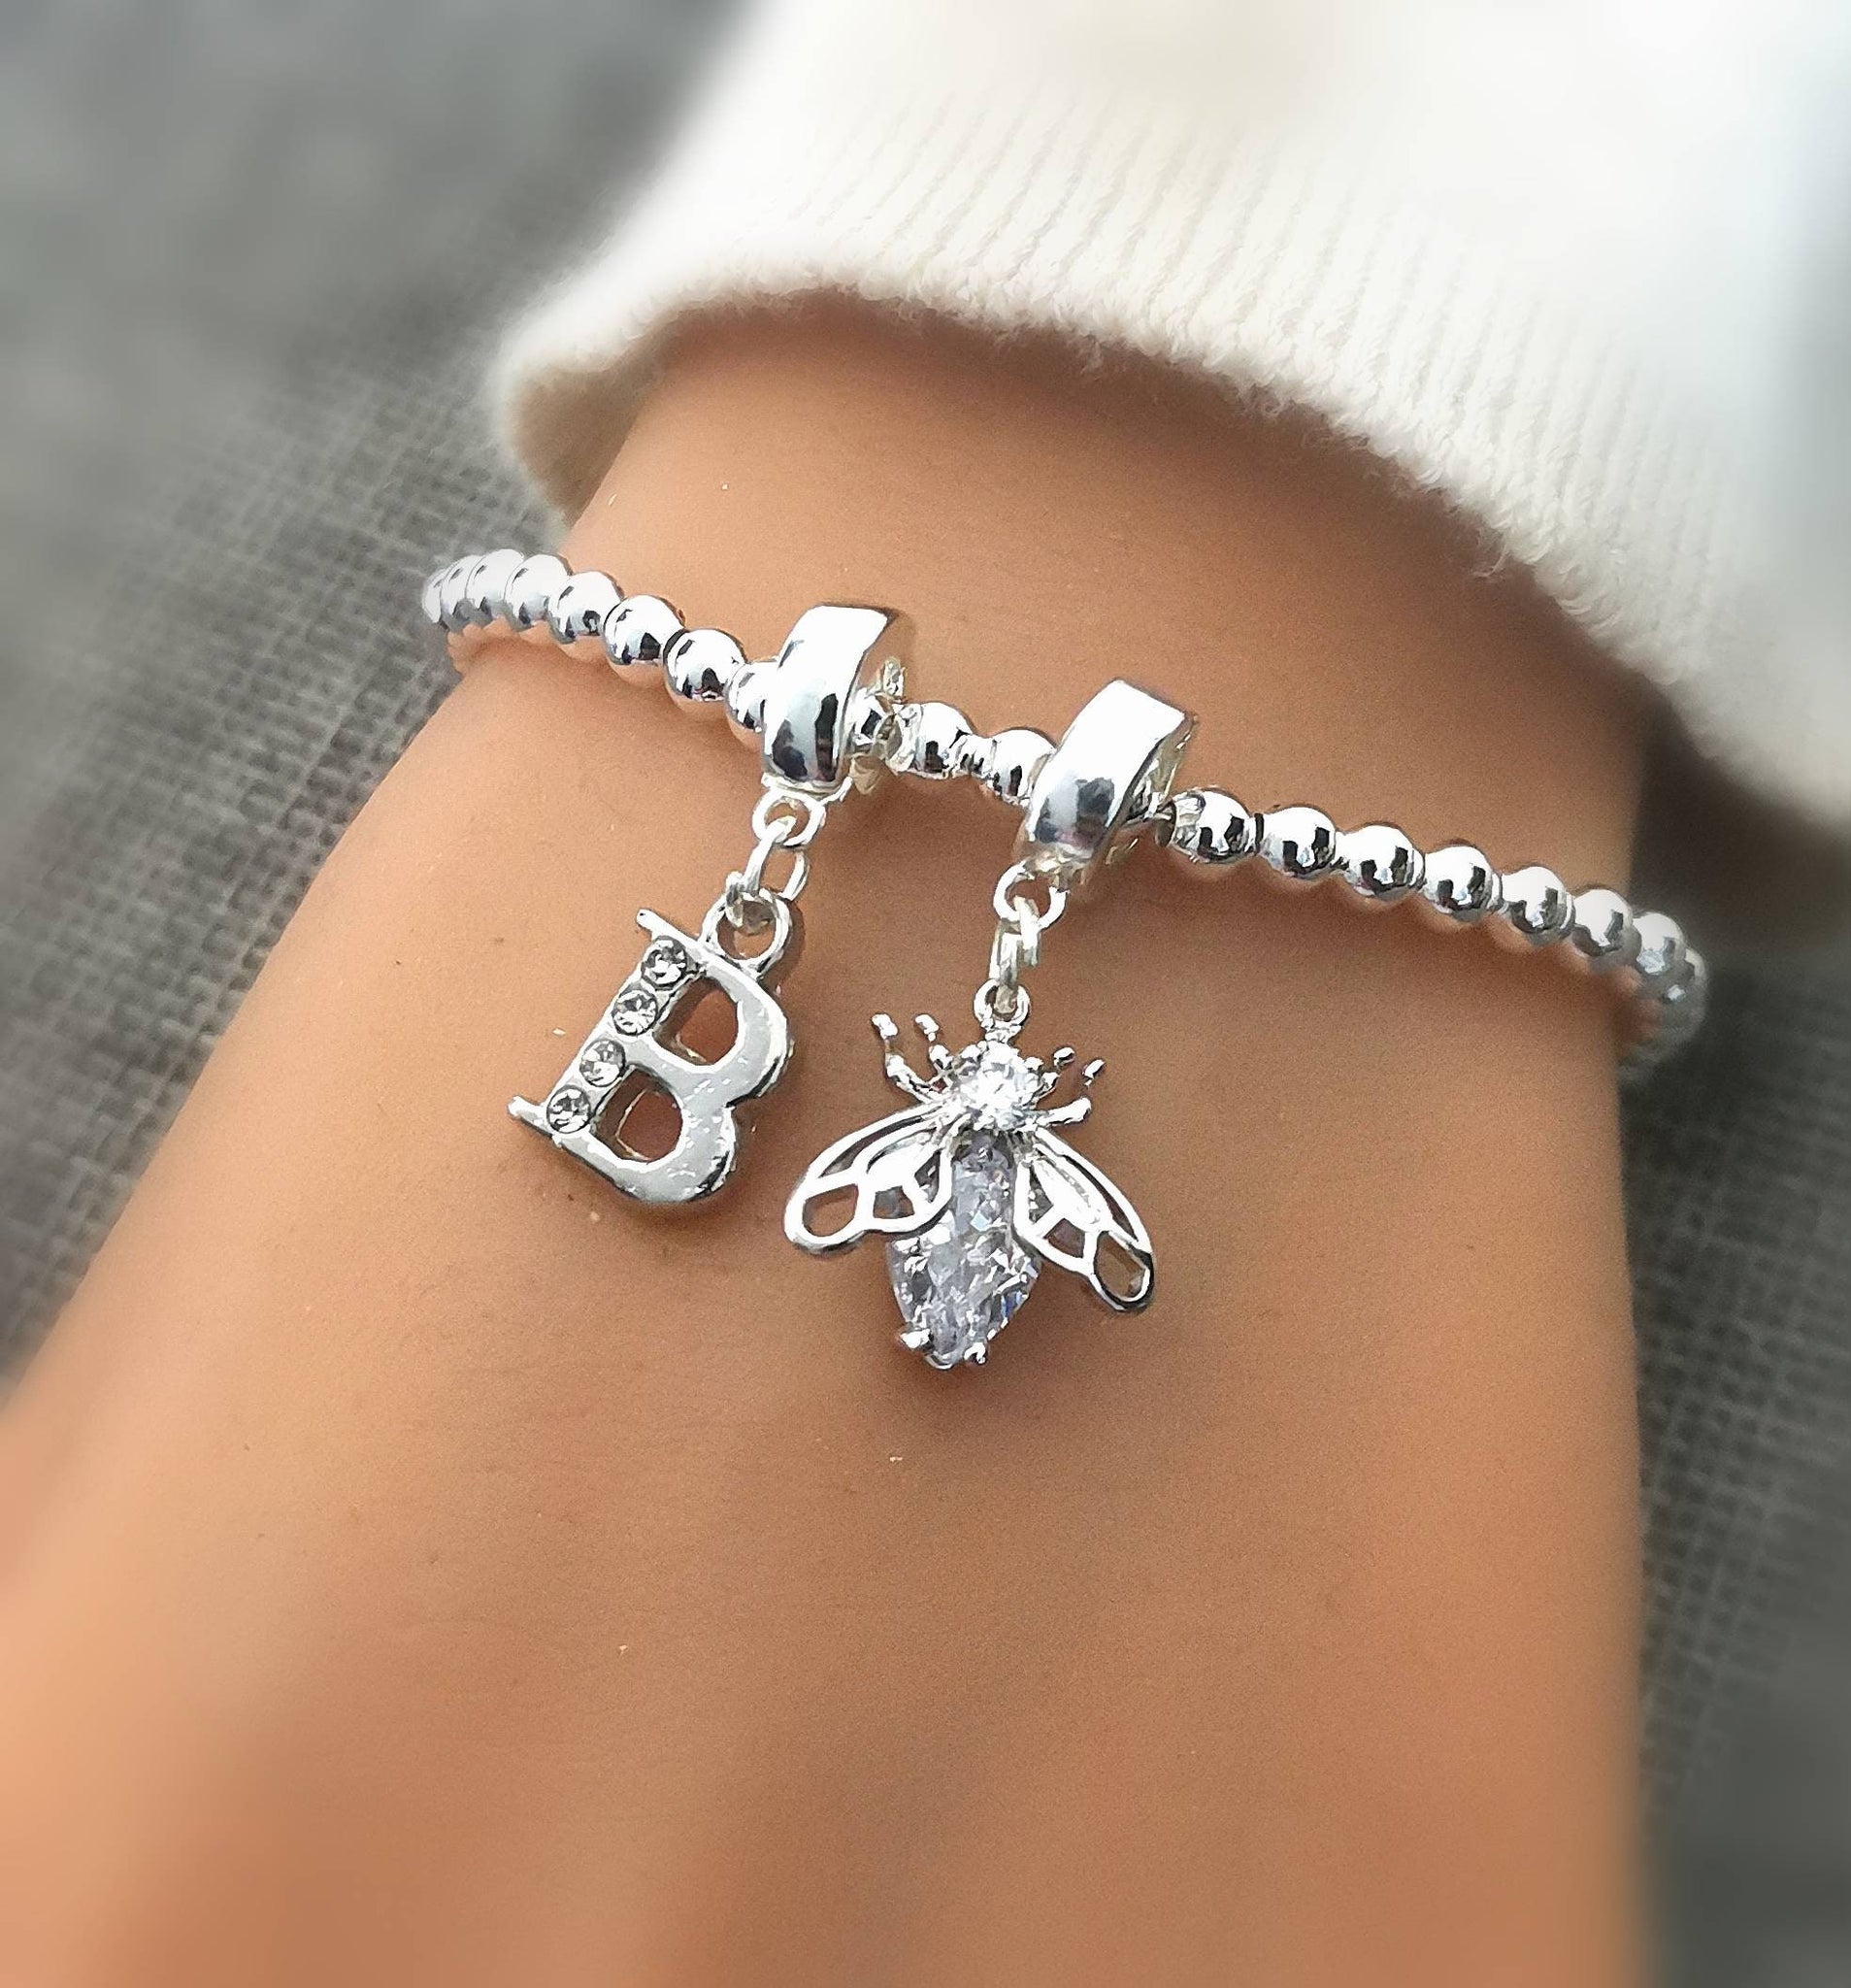 Fly bracelet, Fly jewellery, insect jewellery women, insect bracelet for her, fly bracelet women, house fly gift,silver fly, birthday